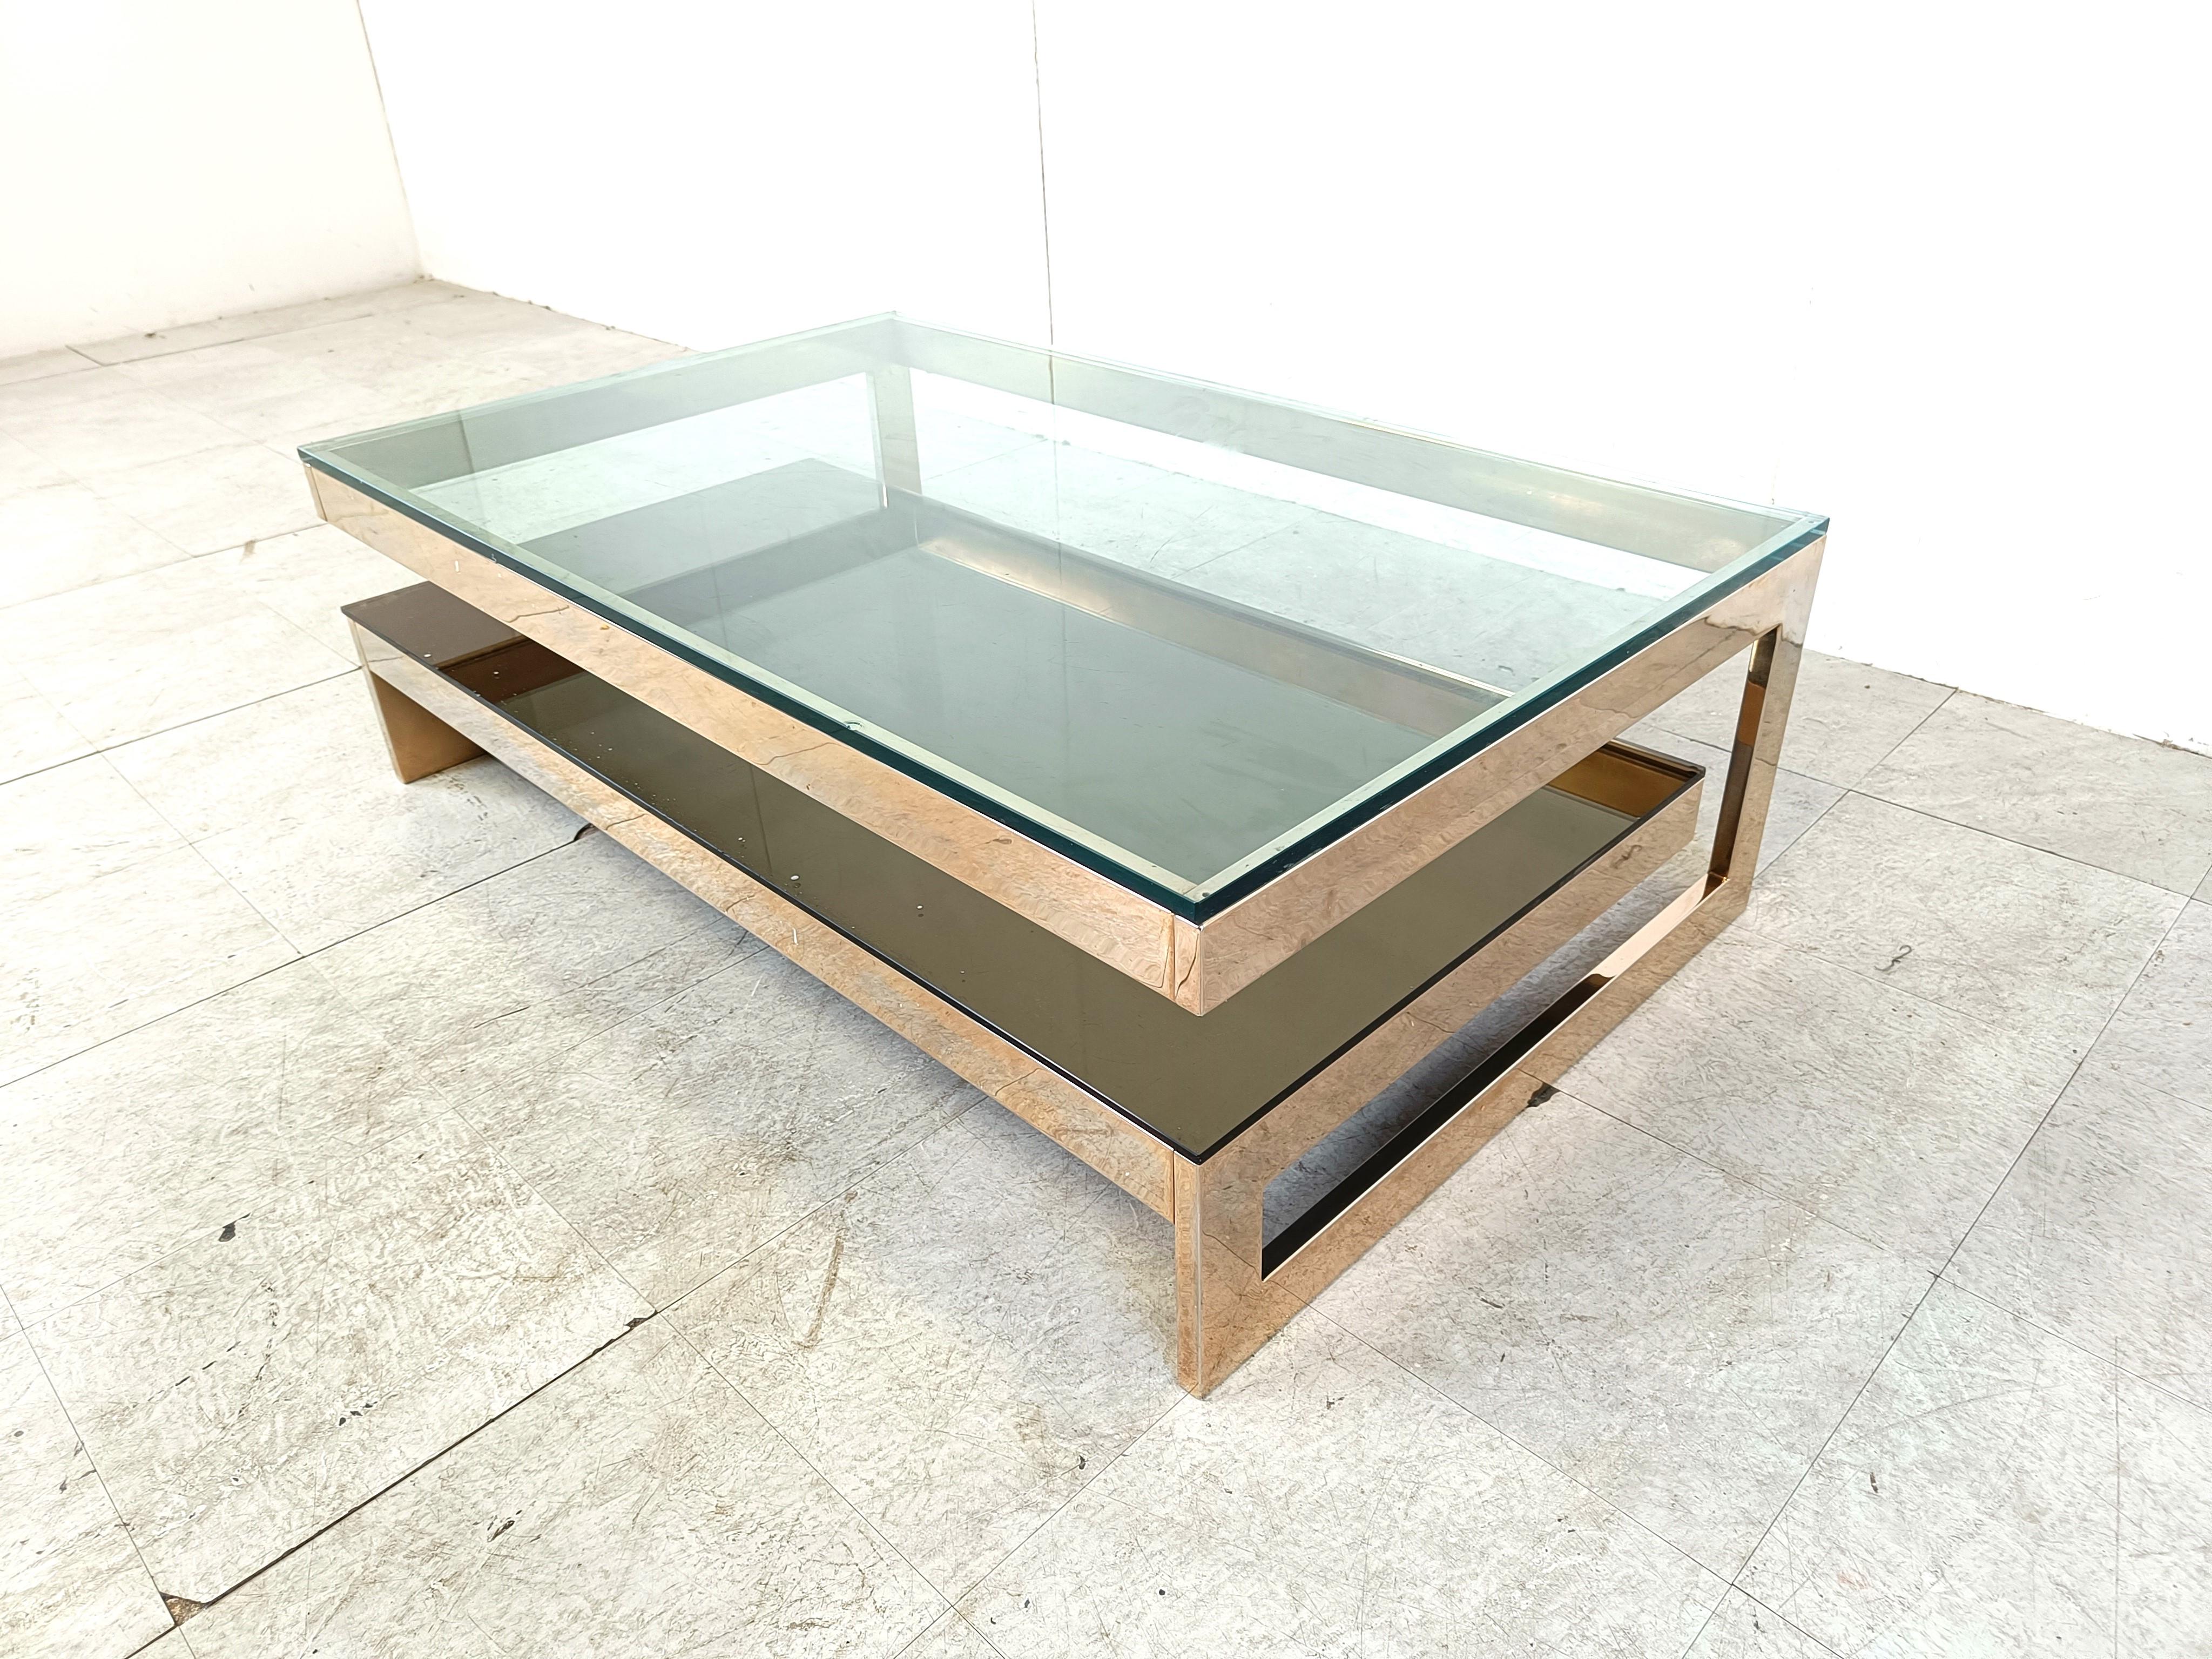 Quality 23kt gold layered and thick clear glass two tier coffee table manufactured by Belgochrom.

This table is a popular model and is referred to as the 'G' model

Belgochrom produced quality furniture pieces with a luxurious appeal.

Good overall